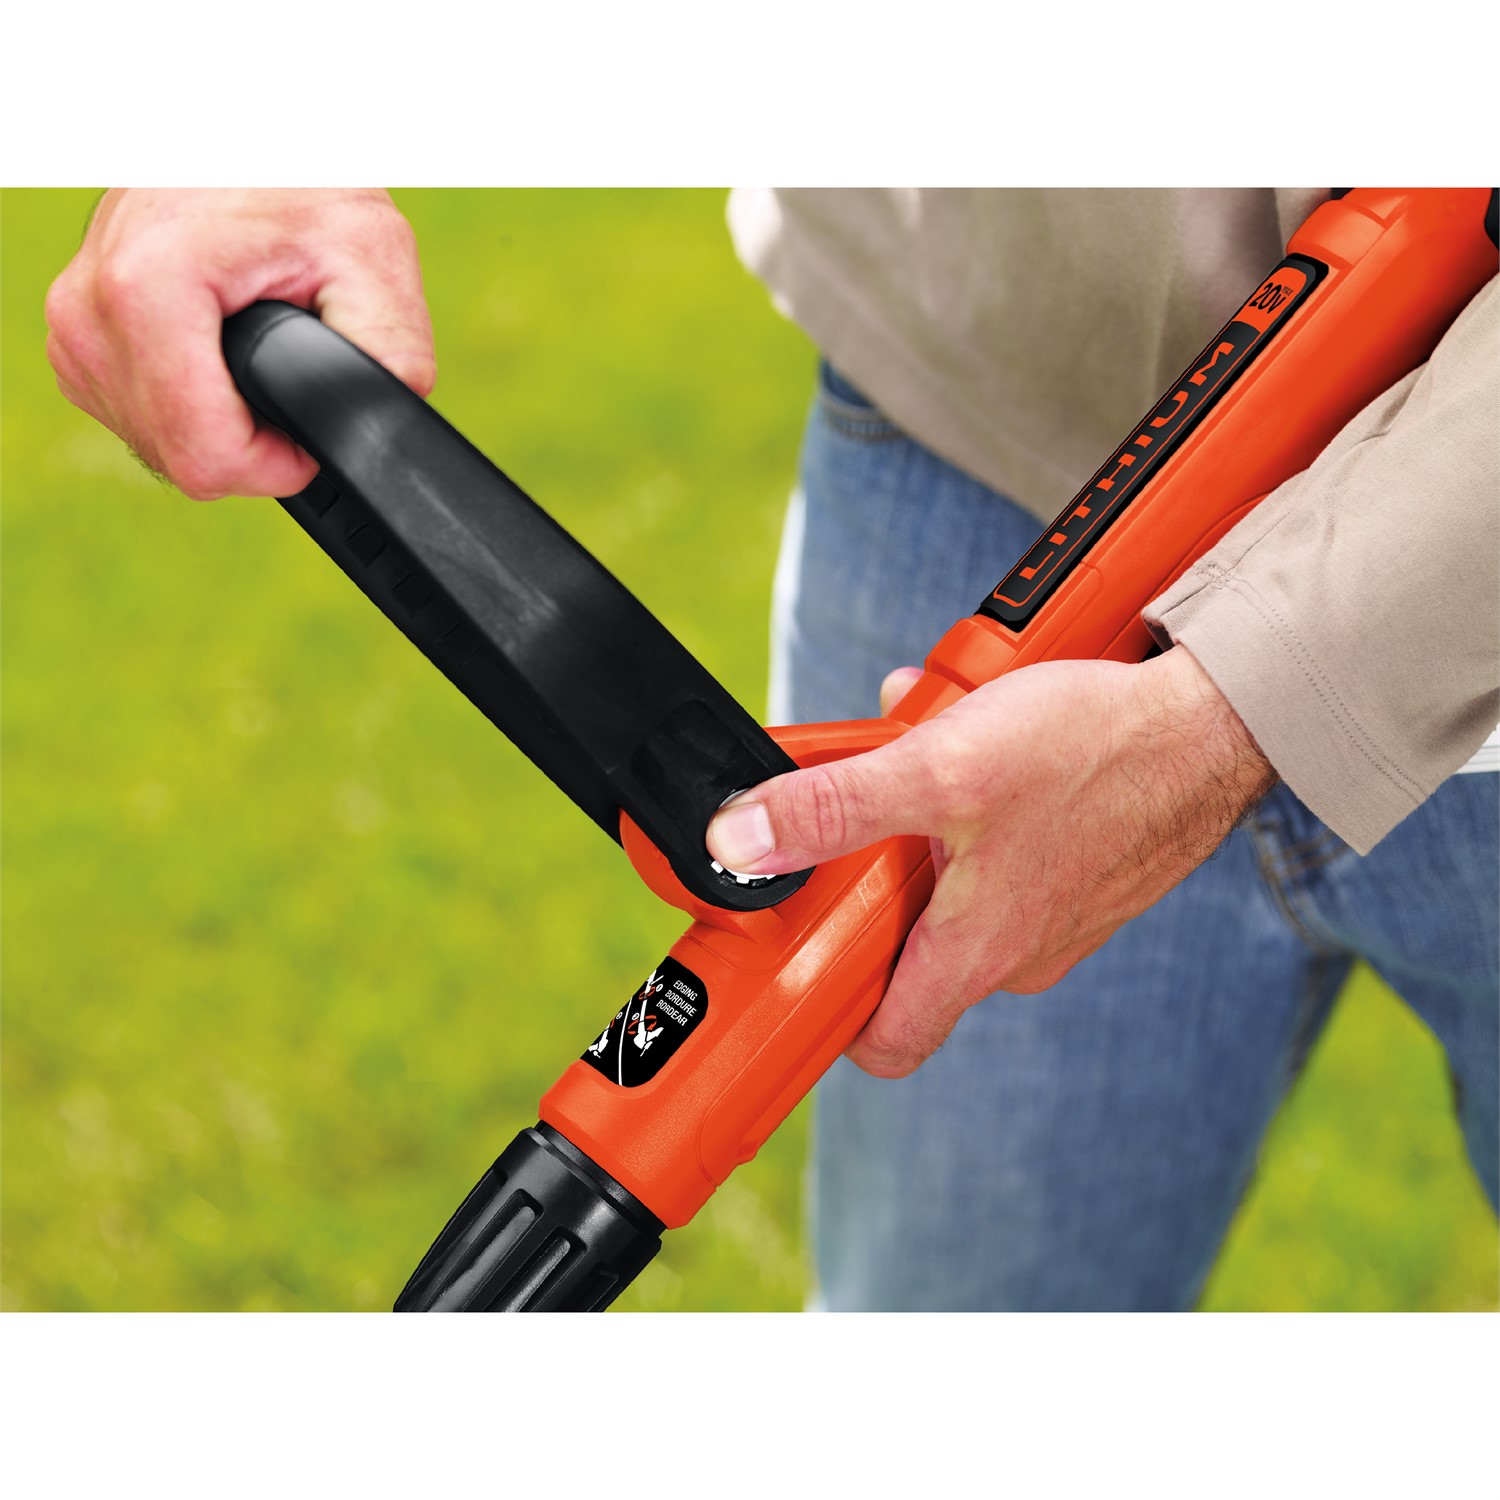 Black & Decker LST220 20V MAX Lithium String Trimmer and Edger Review -  Home Construction Improvement